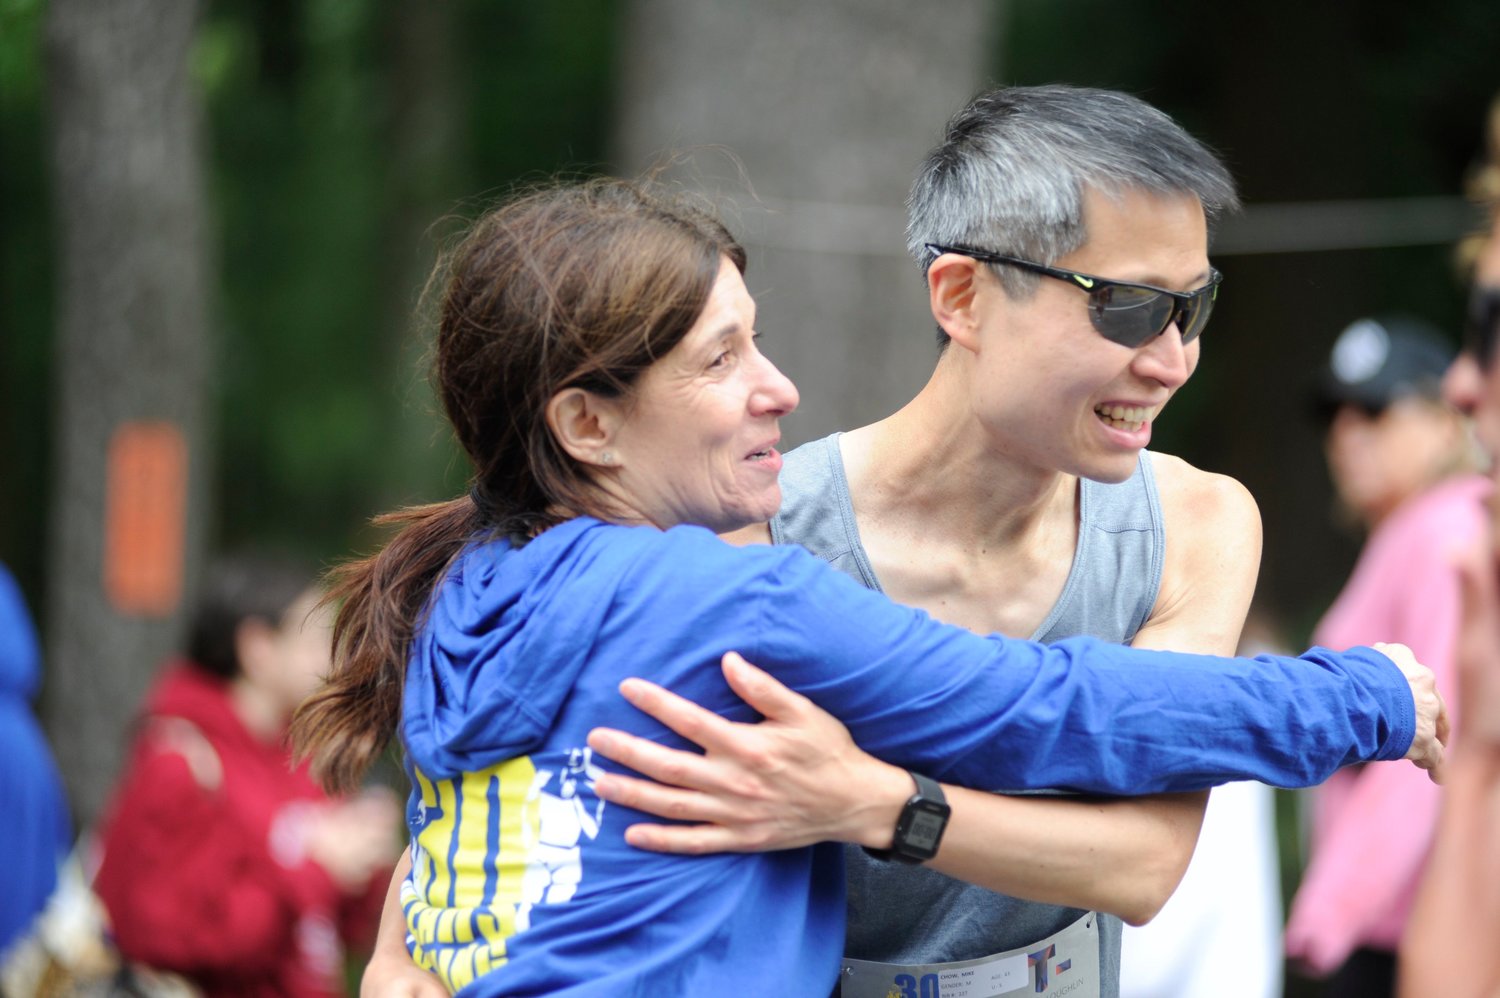 Leaders of the pack. Race director Suzy Rhulen Loughlin, left, is pictured with Mike Chow of Poughkeepsie, NY, moments before the start of the 5k race. Chow finished first overall, completing the course at 16:54.